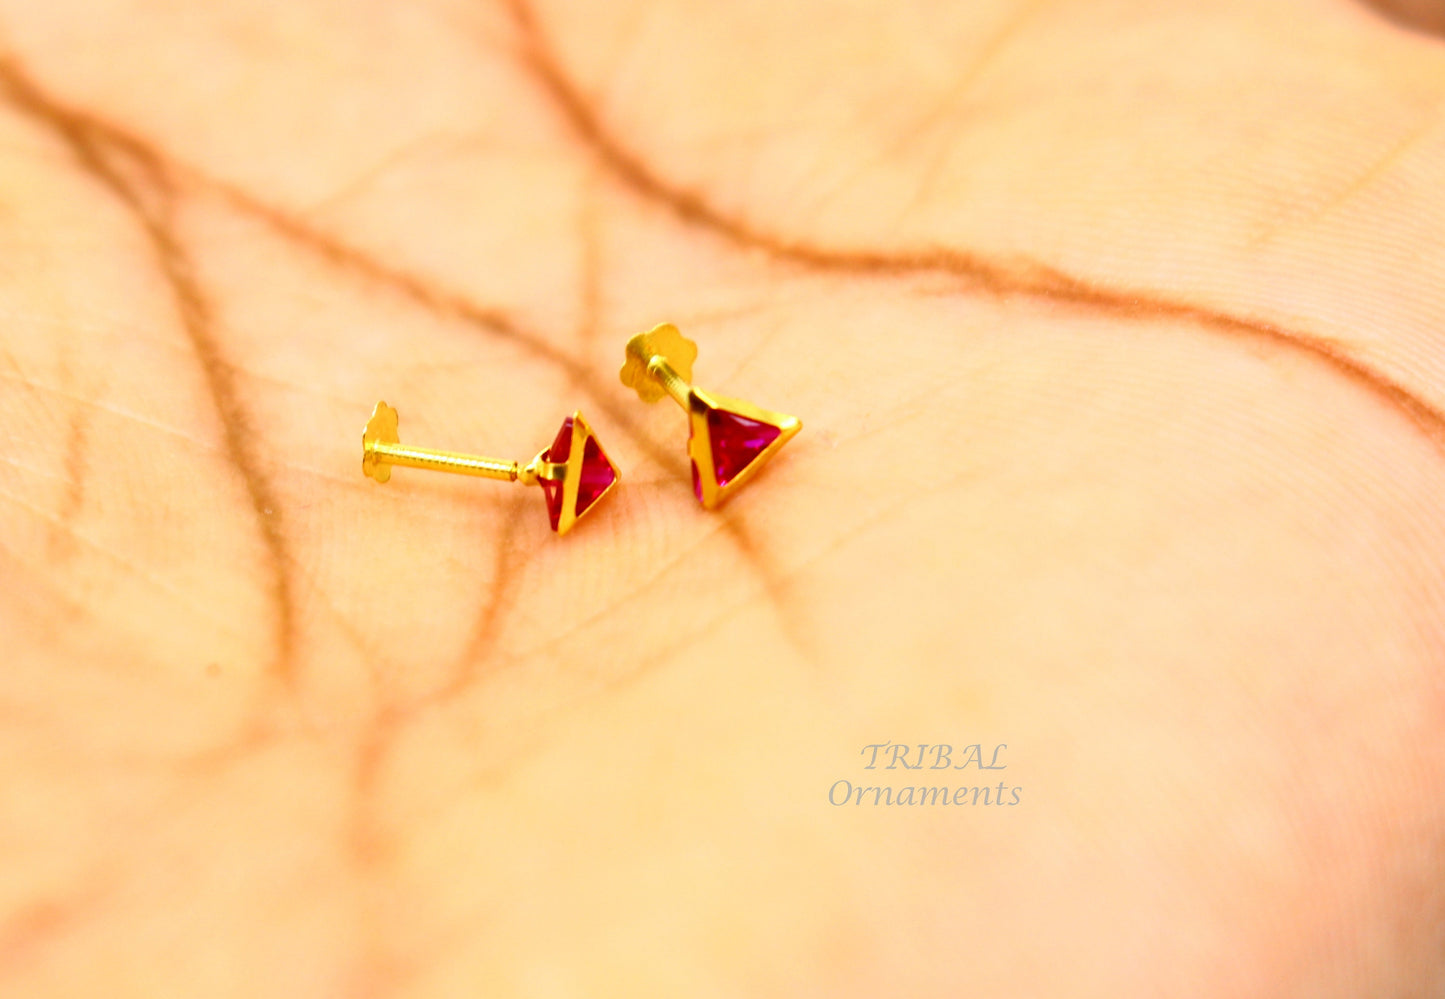 4mm 18kt yellow gold handmade single red stone Triangle shape stud earring cartilage earring customized unisex screw back jewelry er152 - TRIBAL ORNAMENTS